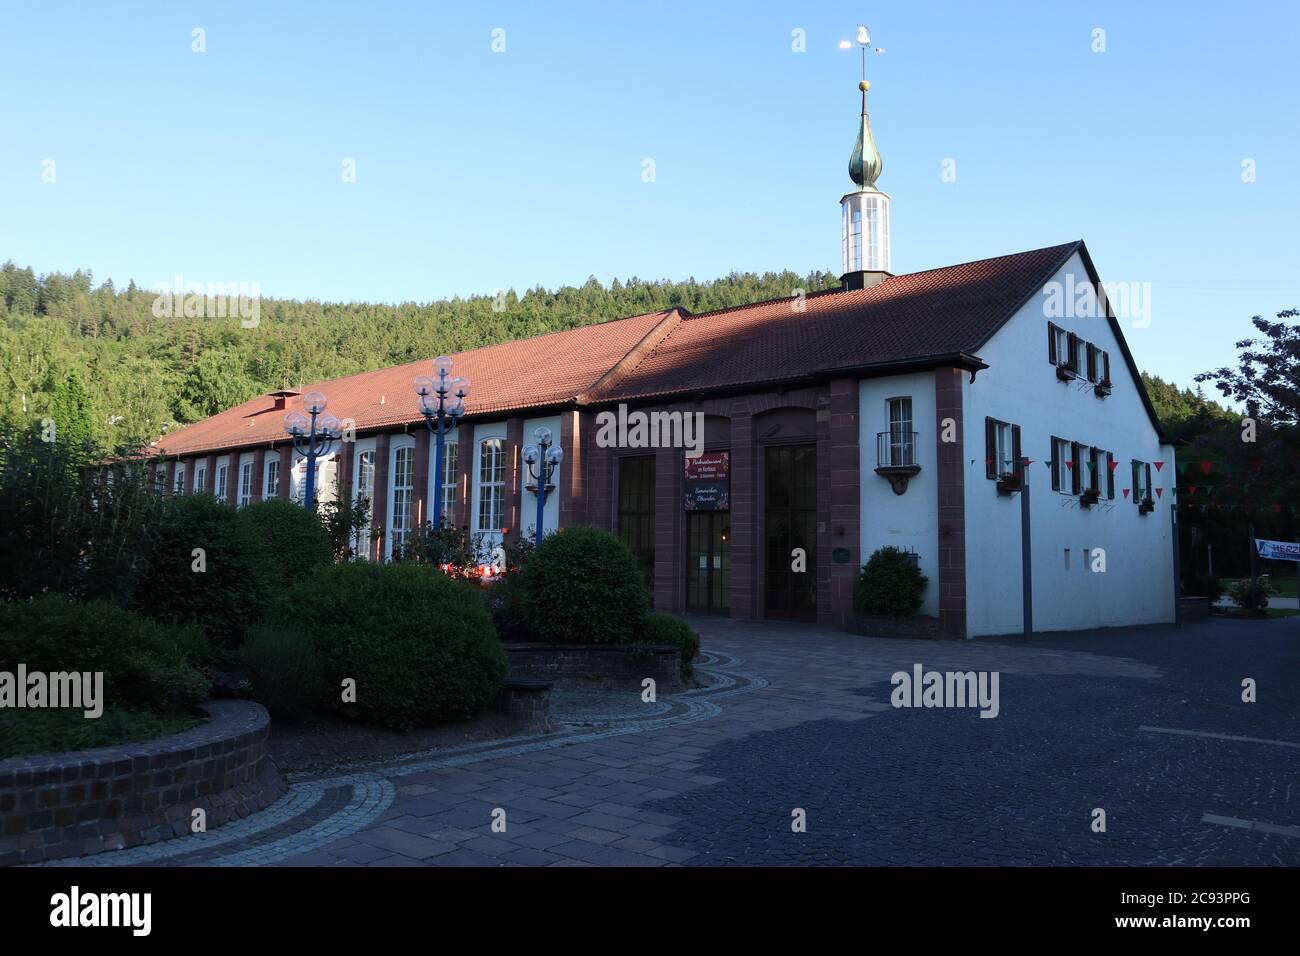 Bad Liebenzell, Baden-Württemberg/ Germany - June 02 2019: Kurhaus (main building of the spa resort) in Bad Liebenzell. Bad Liebenzell is a spa town i Stock Photo